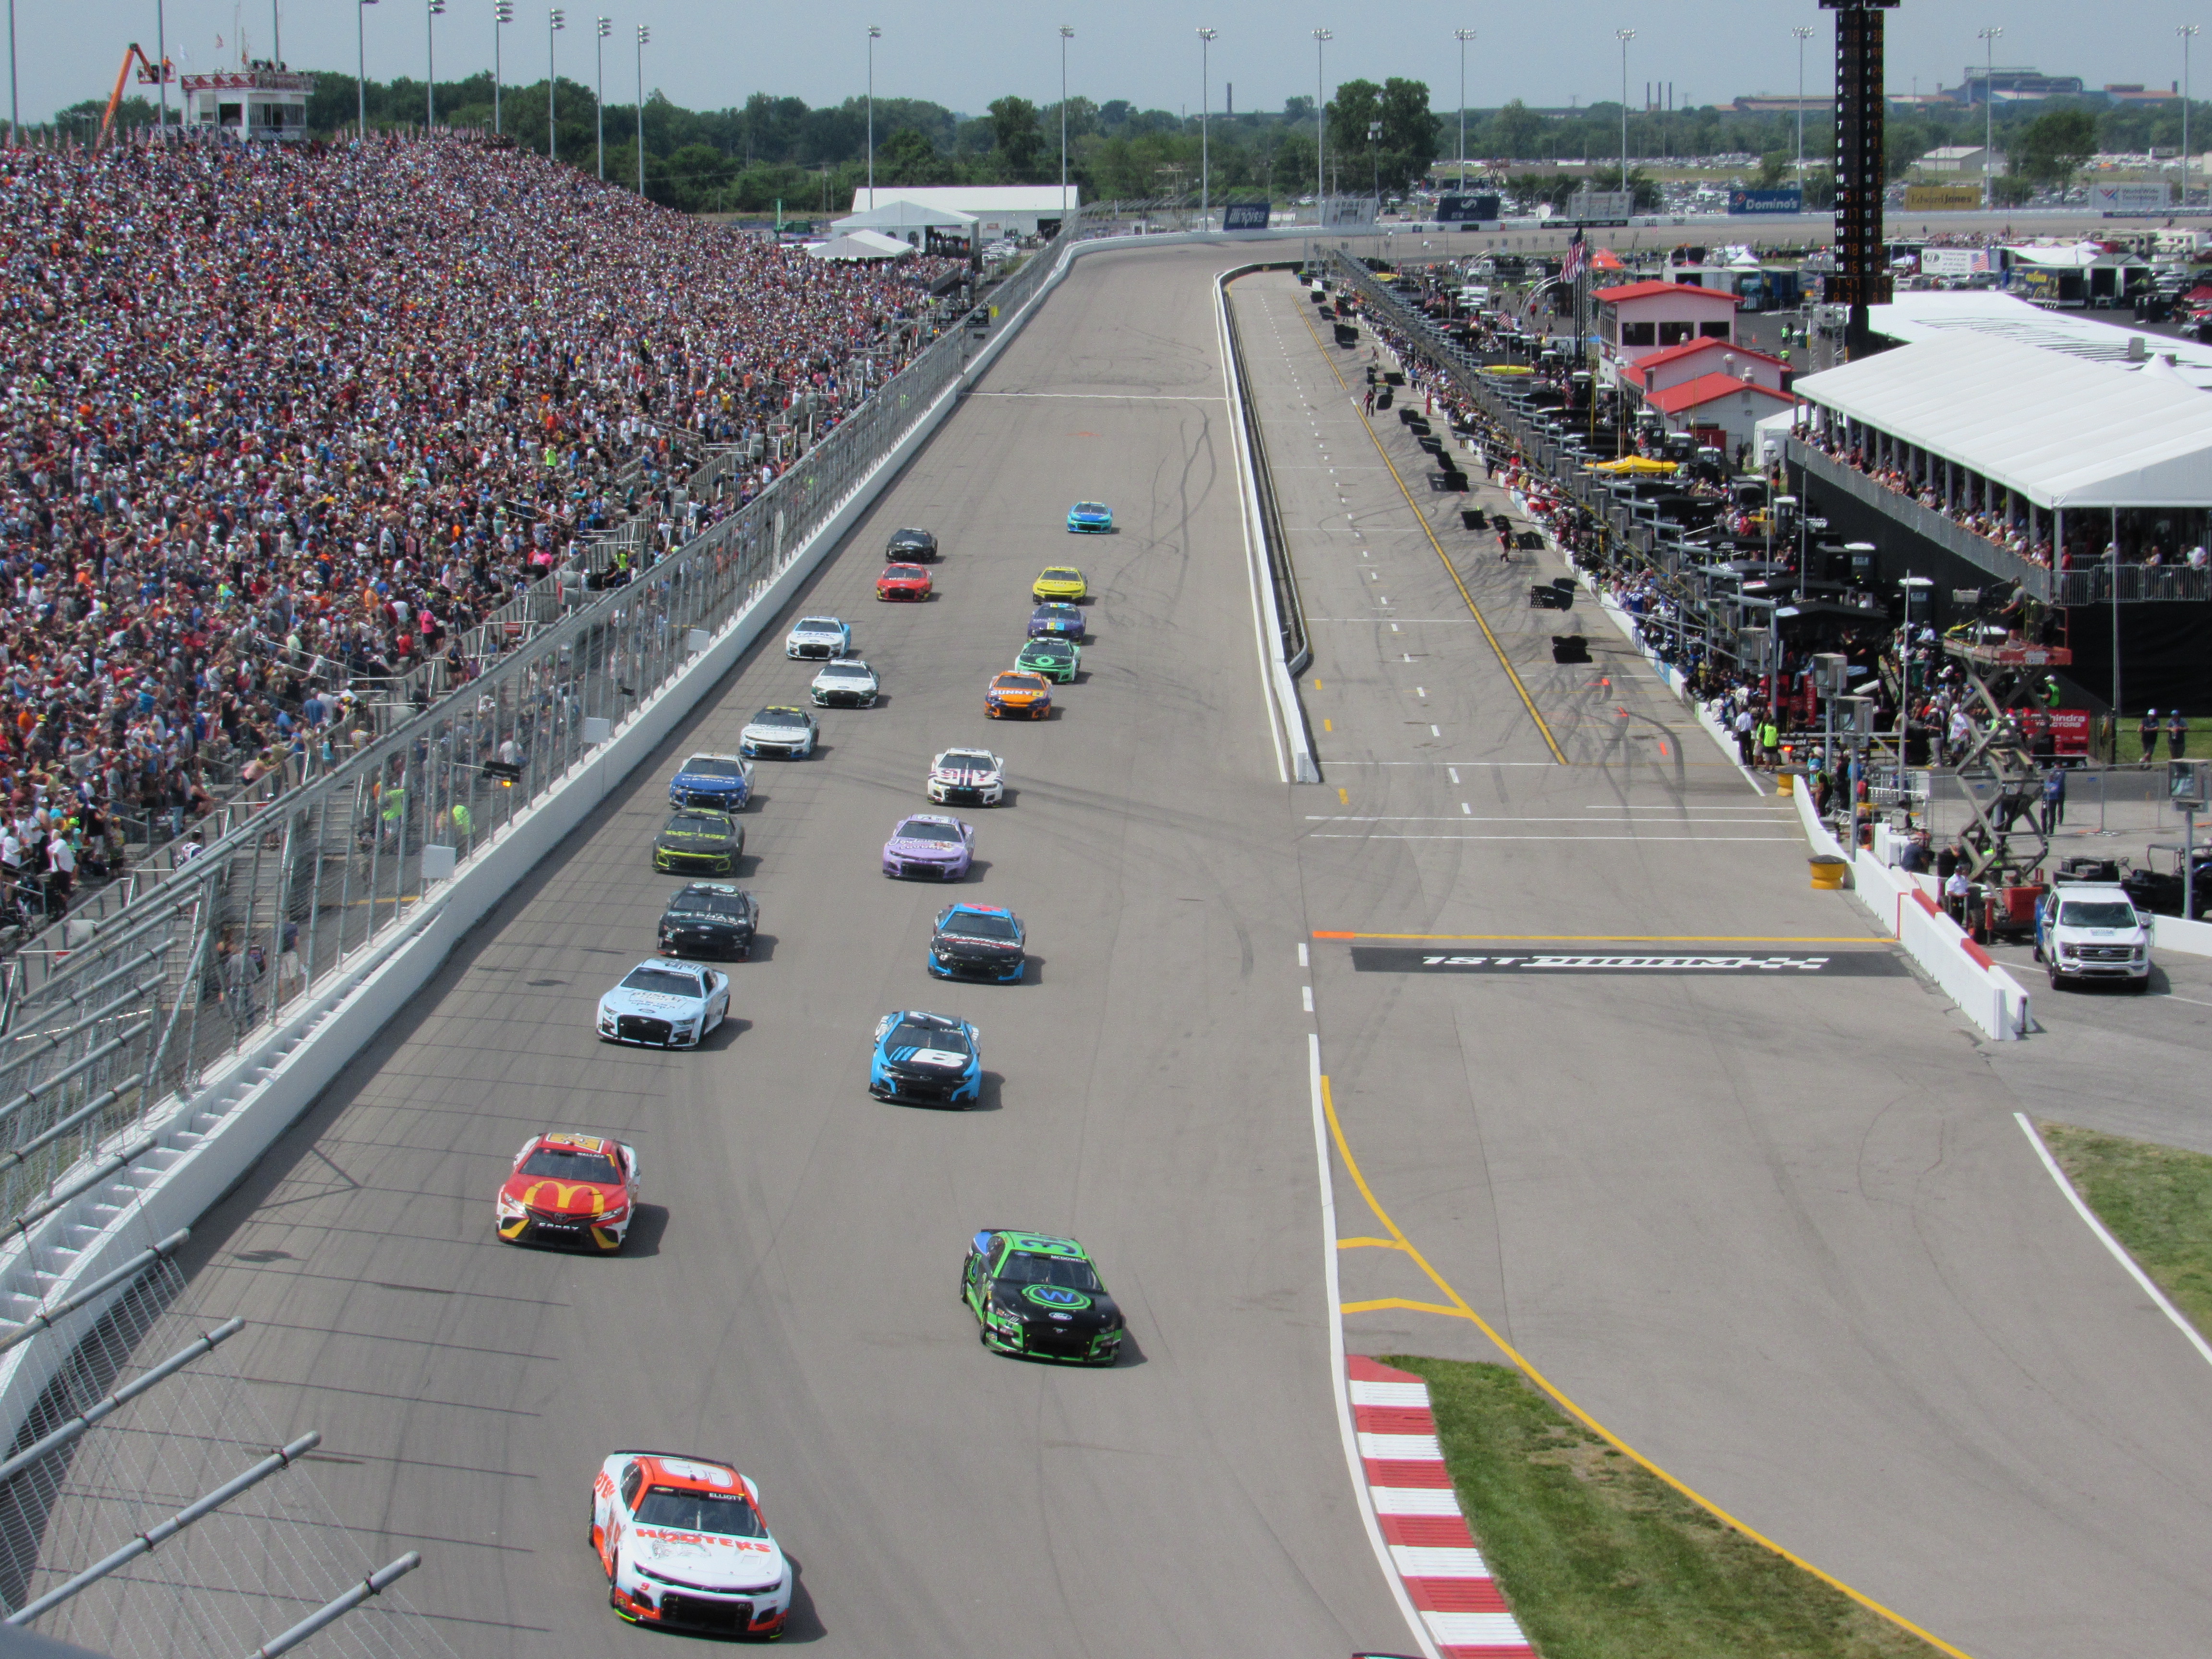 World Wide Technology Raceway announces second consecutive sellout of Enjoy Illinois 300 Presented by TicketSmarter NASCAR Cup Series race